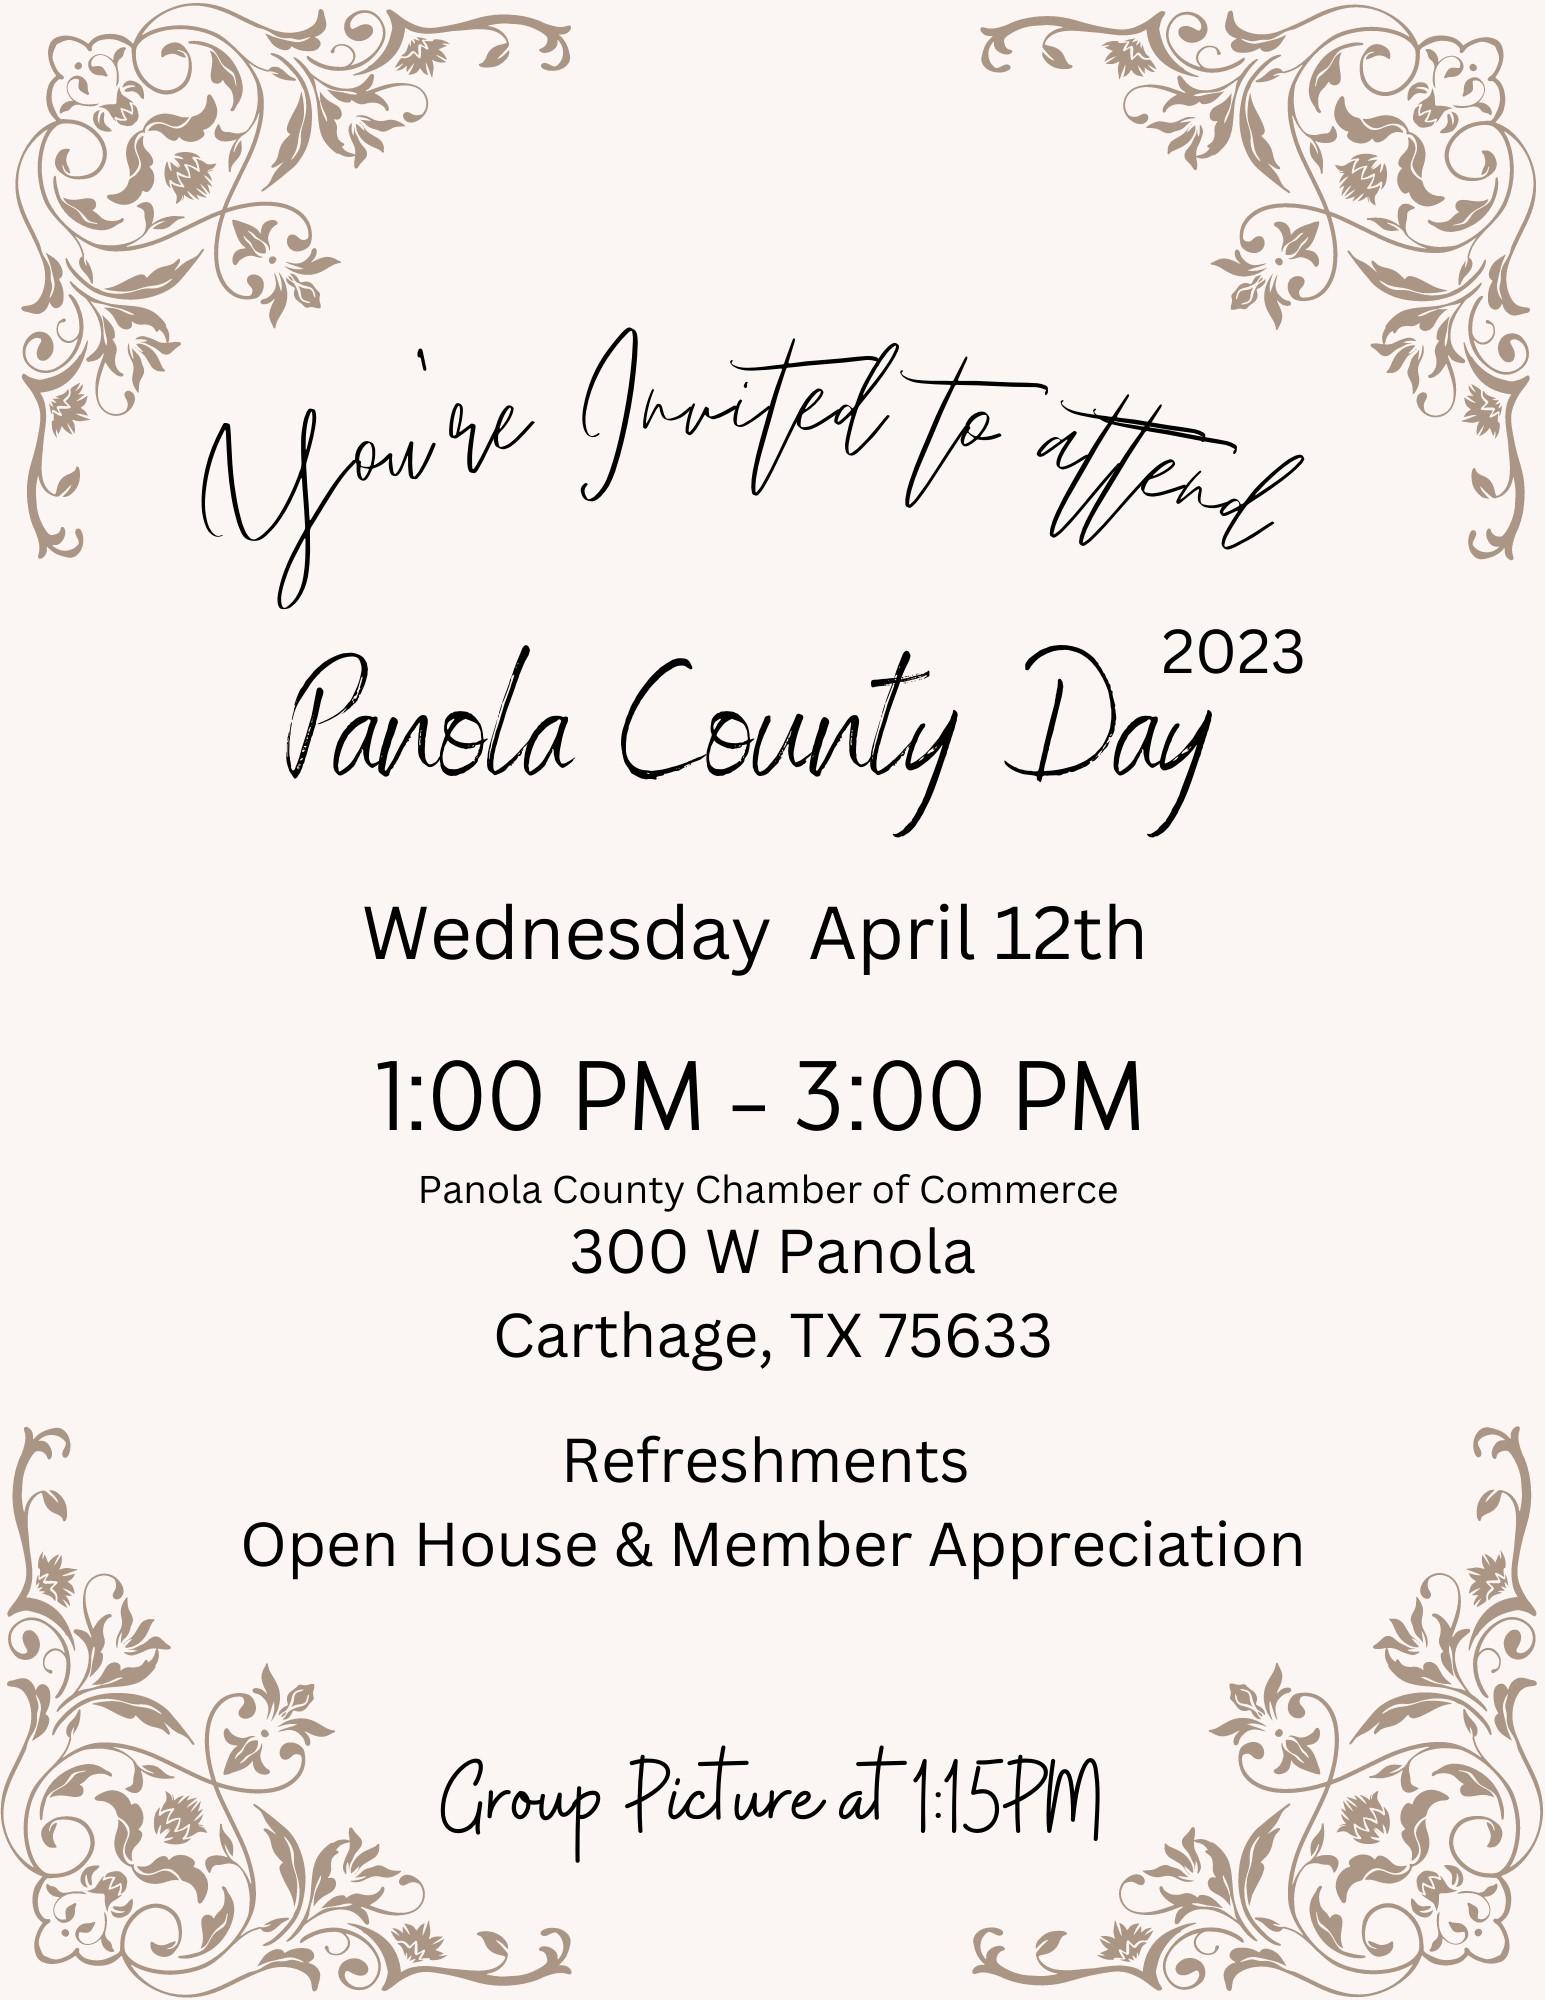 Event Information - Panola County Texas Chamber of Commerce